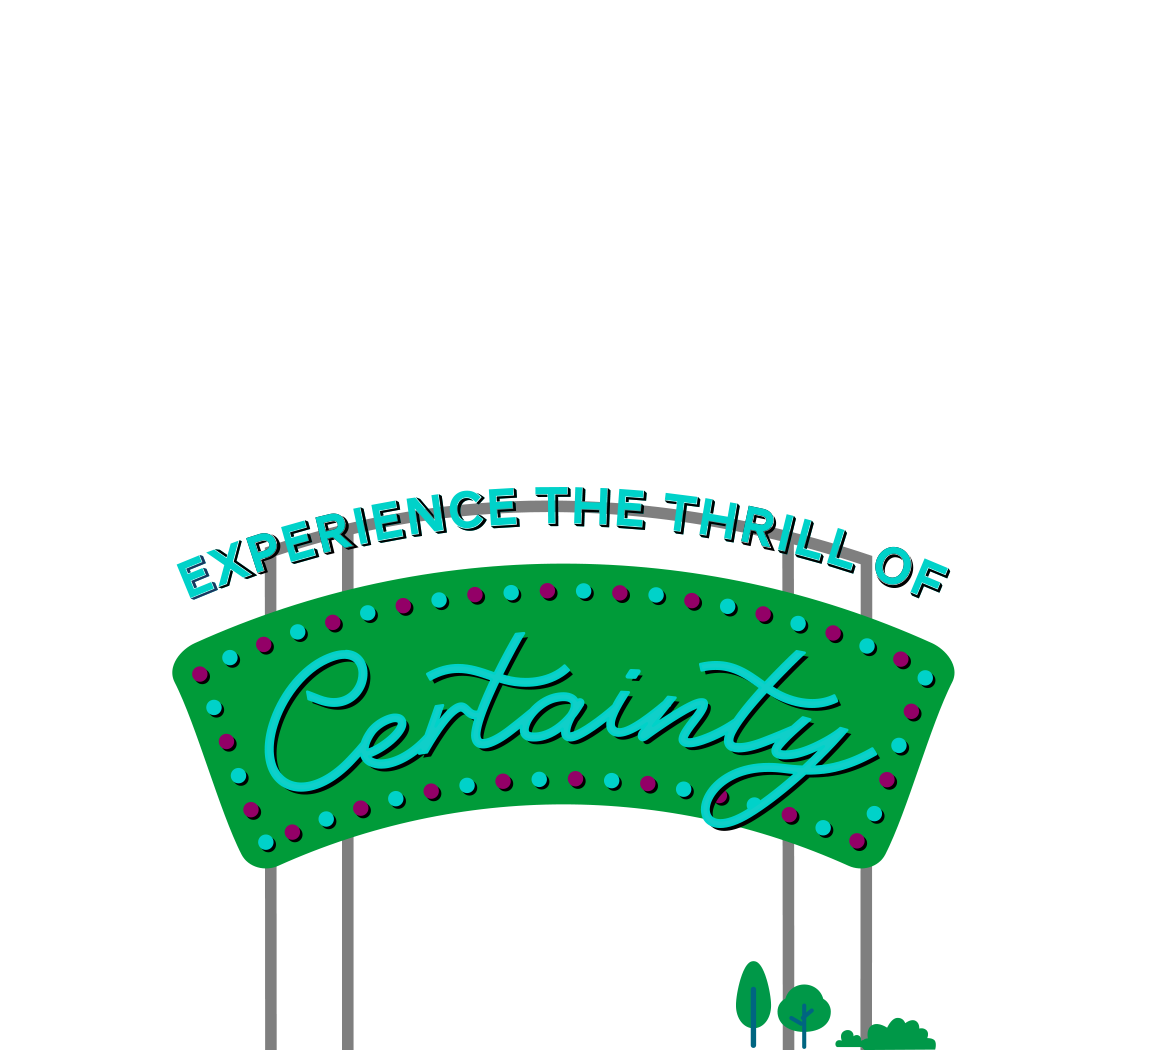 Welcome to QlikWorld® - Experience the thrill of certainty.